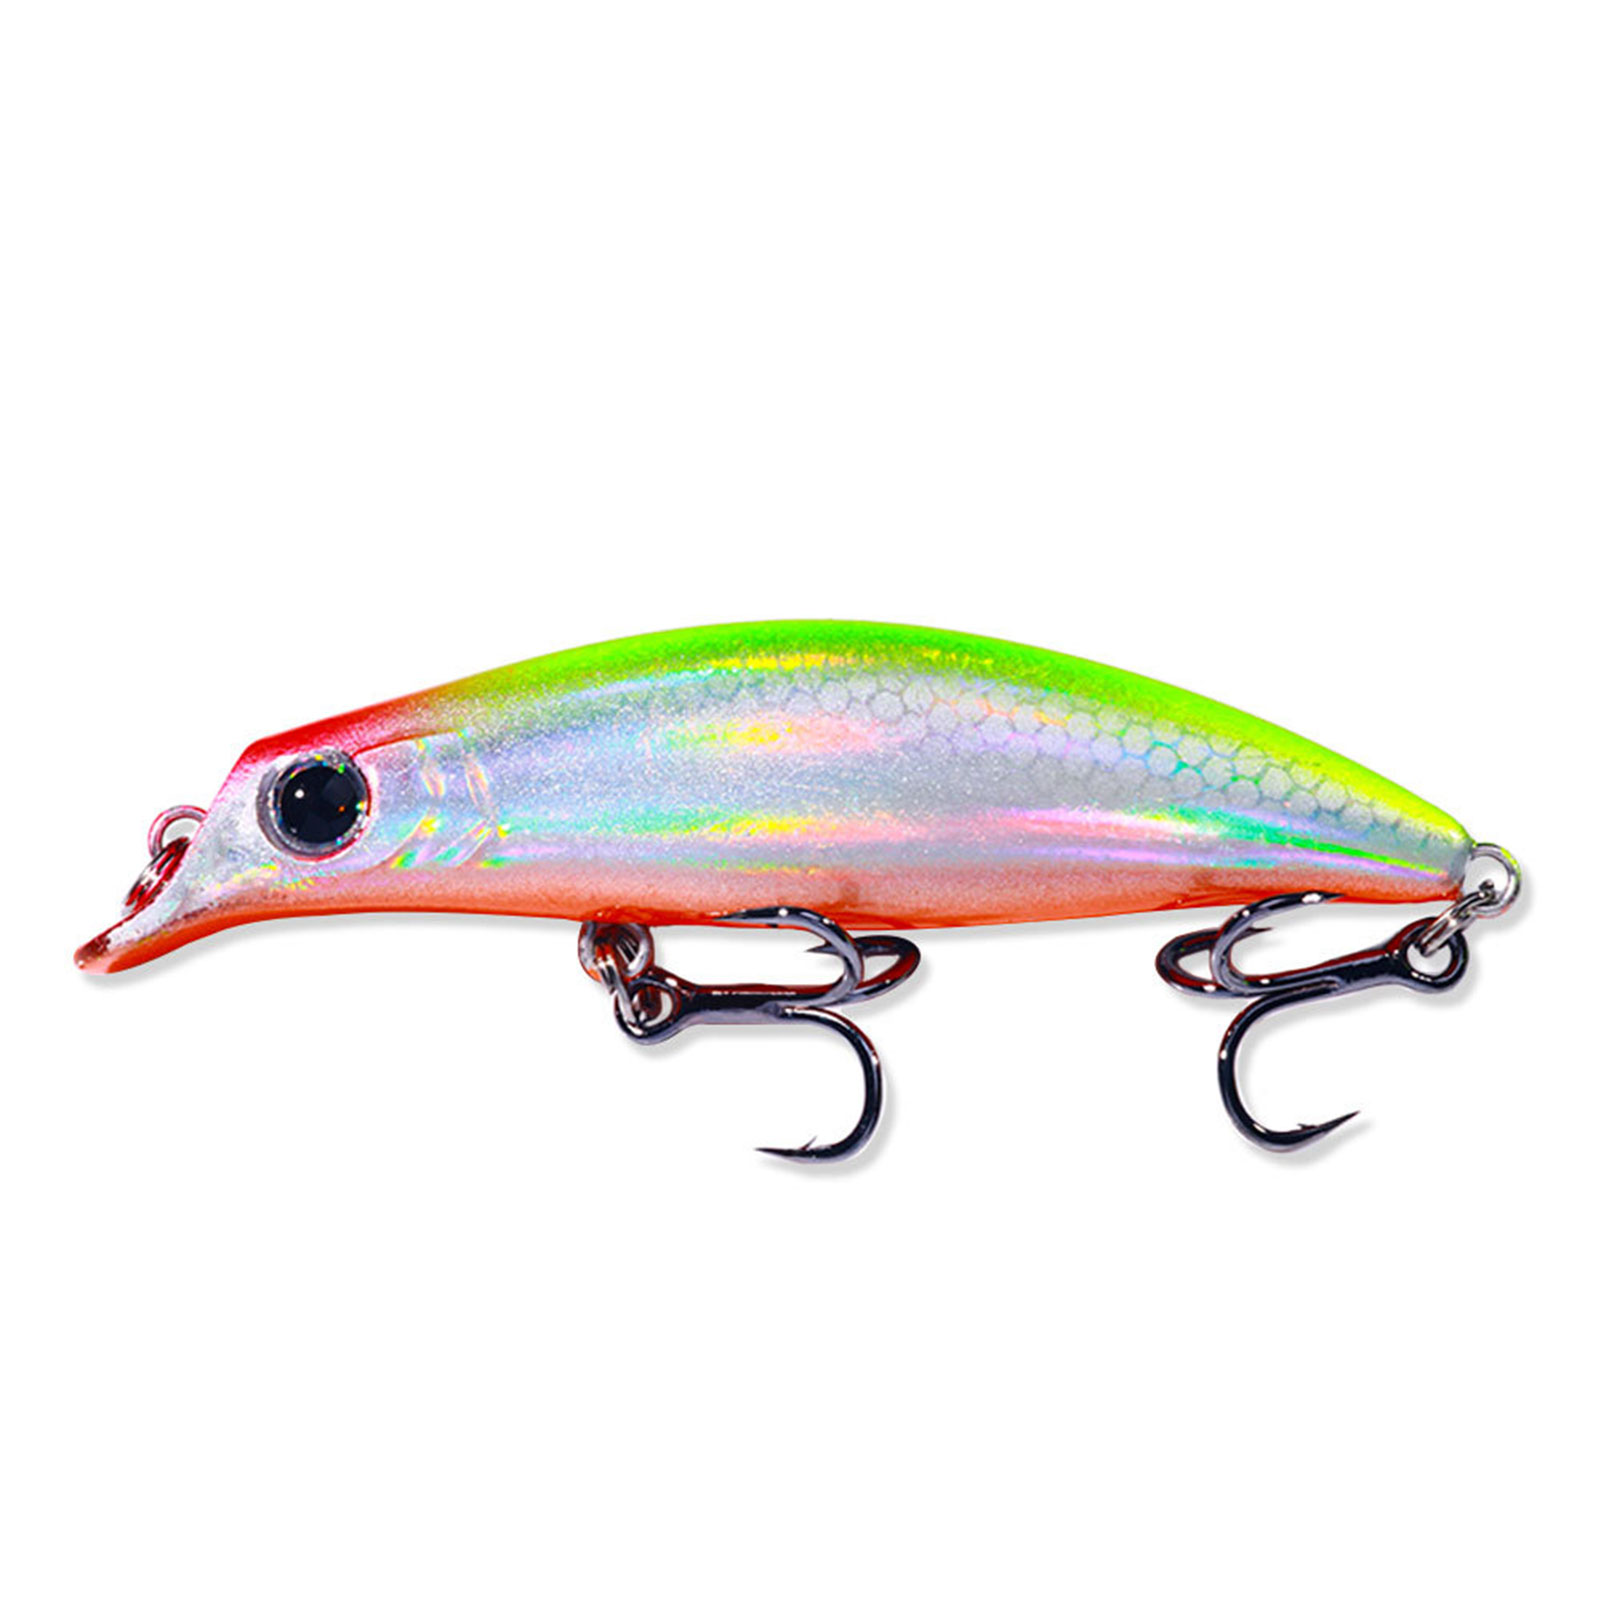 KDQS Topwater Soft Plastic Lures Baits All-Purpose Fishing Lures for Bass  Trout Crappie Salmon